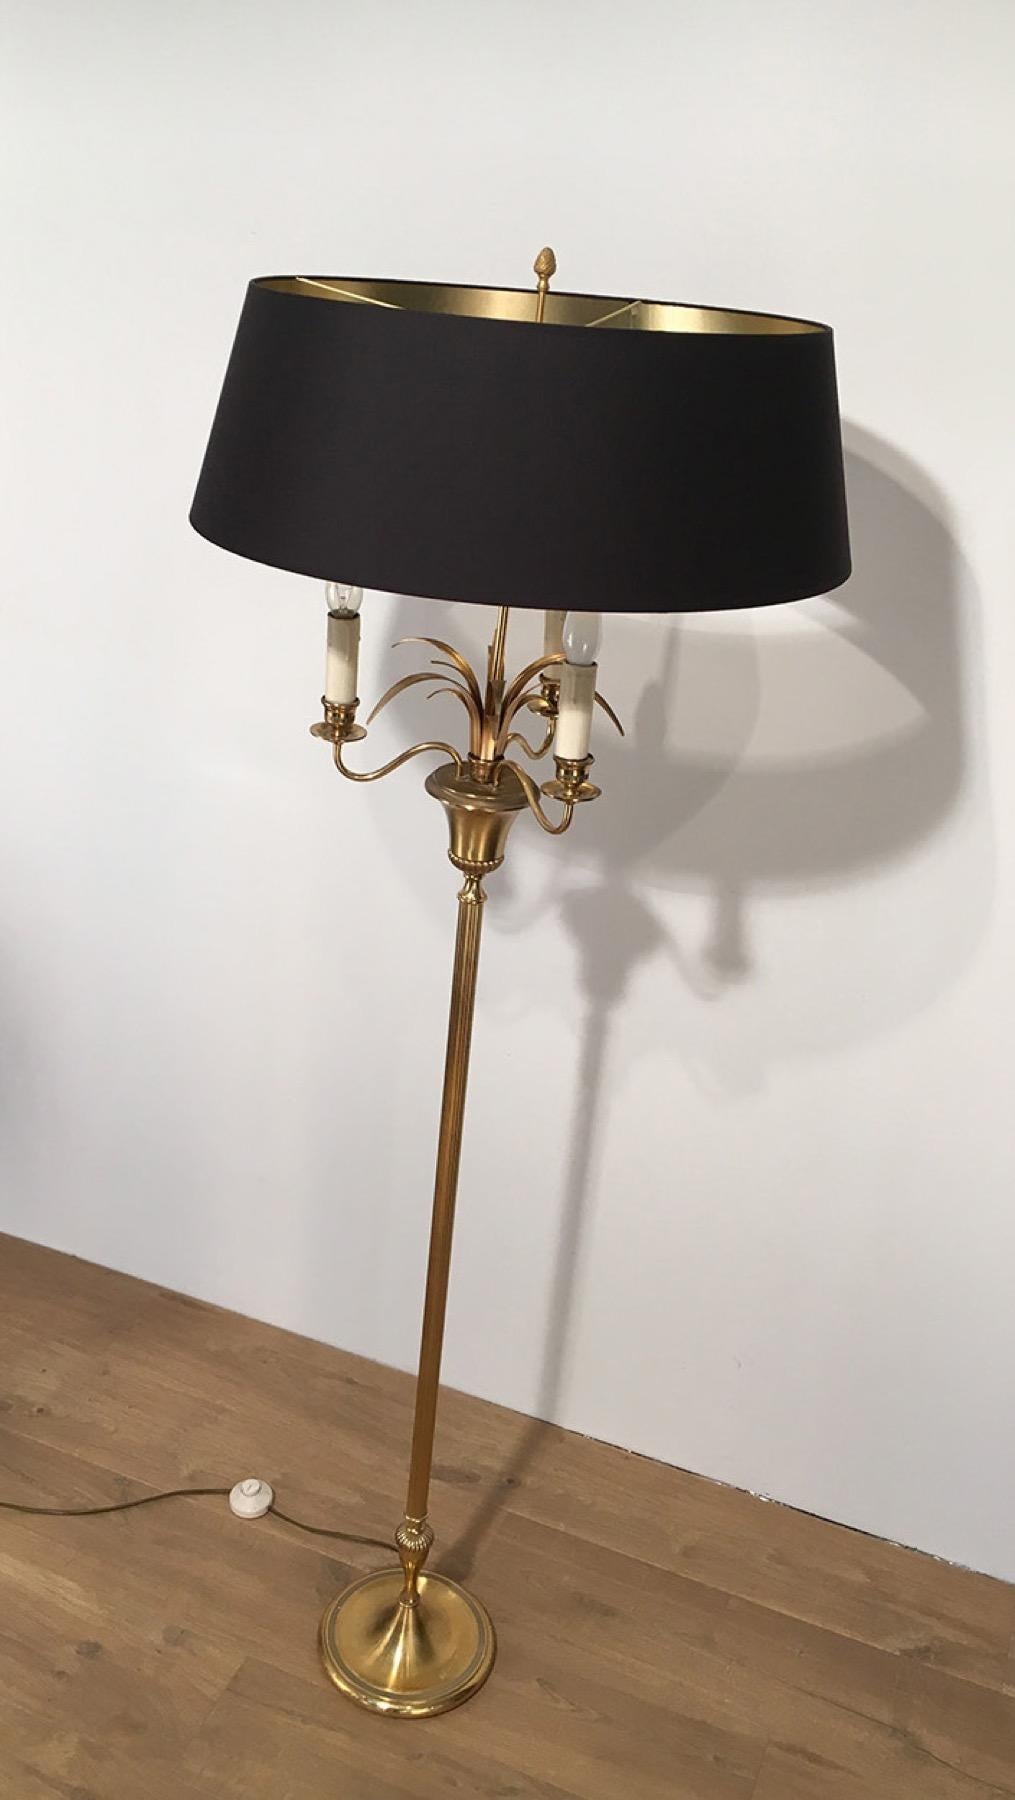 Pineapple Brass Floor Lamp in the Style of Maison Charles, Circa 1970 For Sale 4